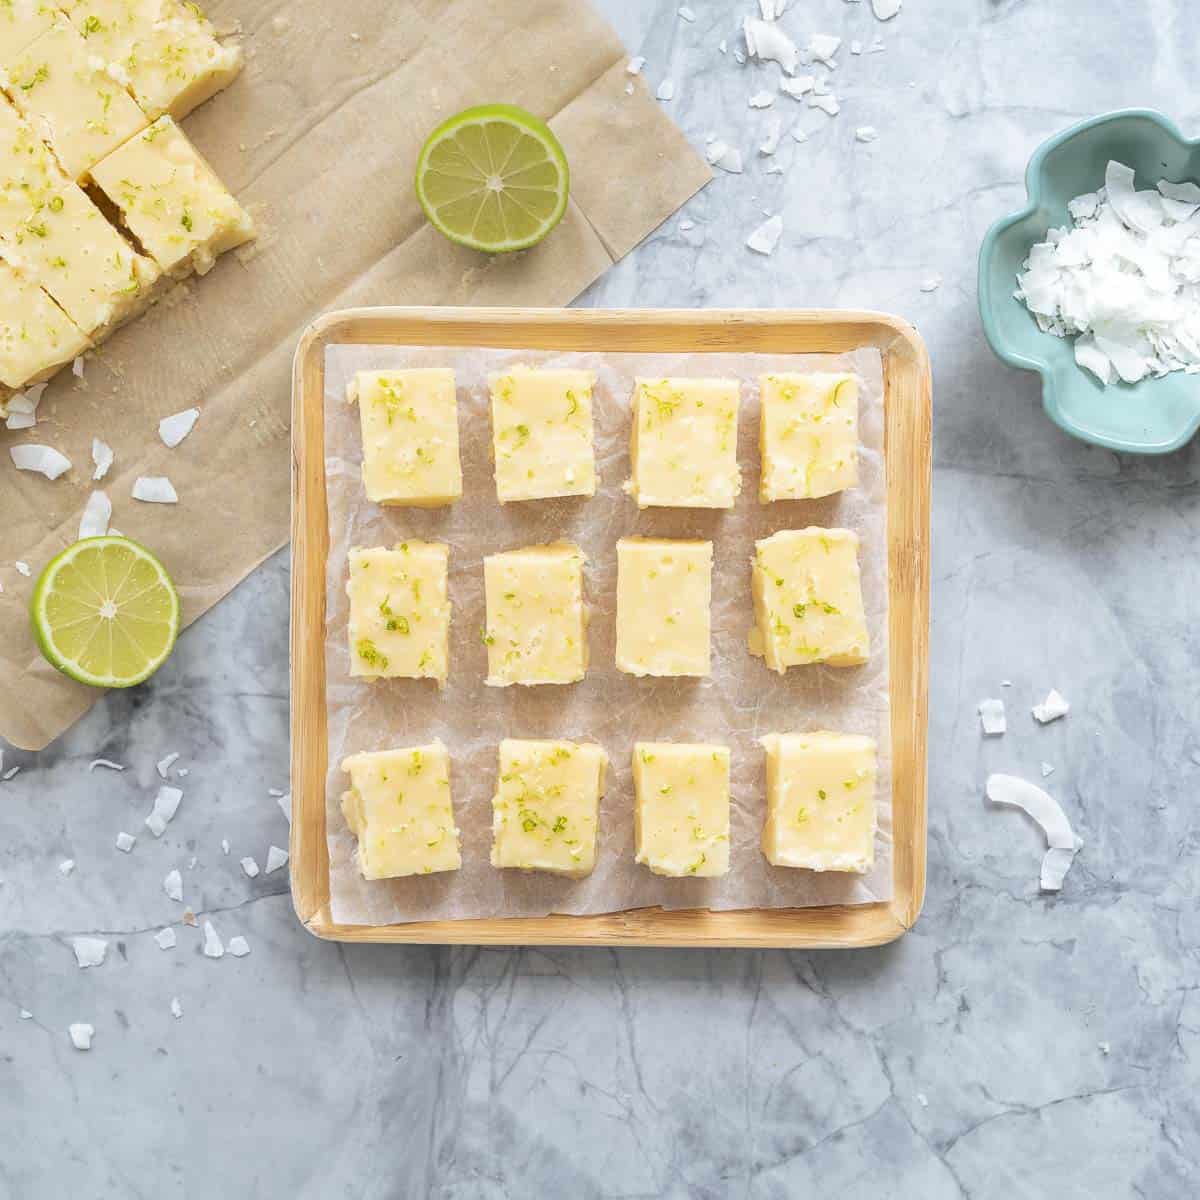 Slices of vegan fudge laid out on a piece of crinkled baking paper on a square wooden serving board next to a small serving dish of coconut flakes and halved limes and scattered coconut flakes on the bench